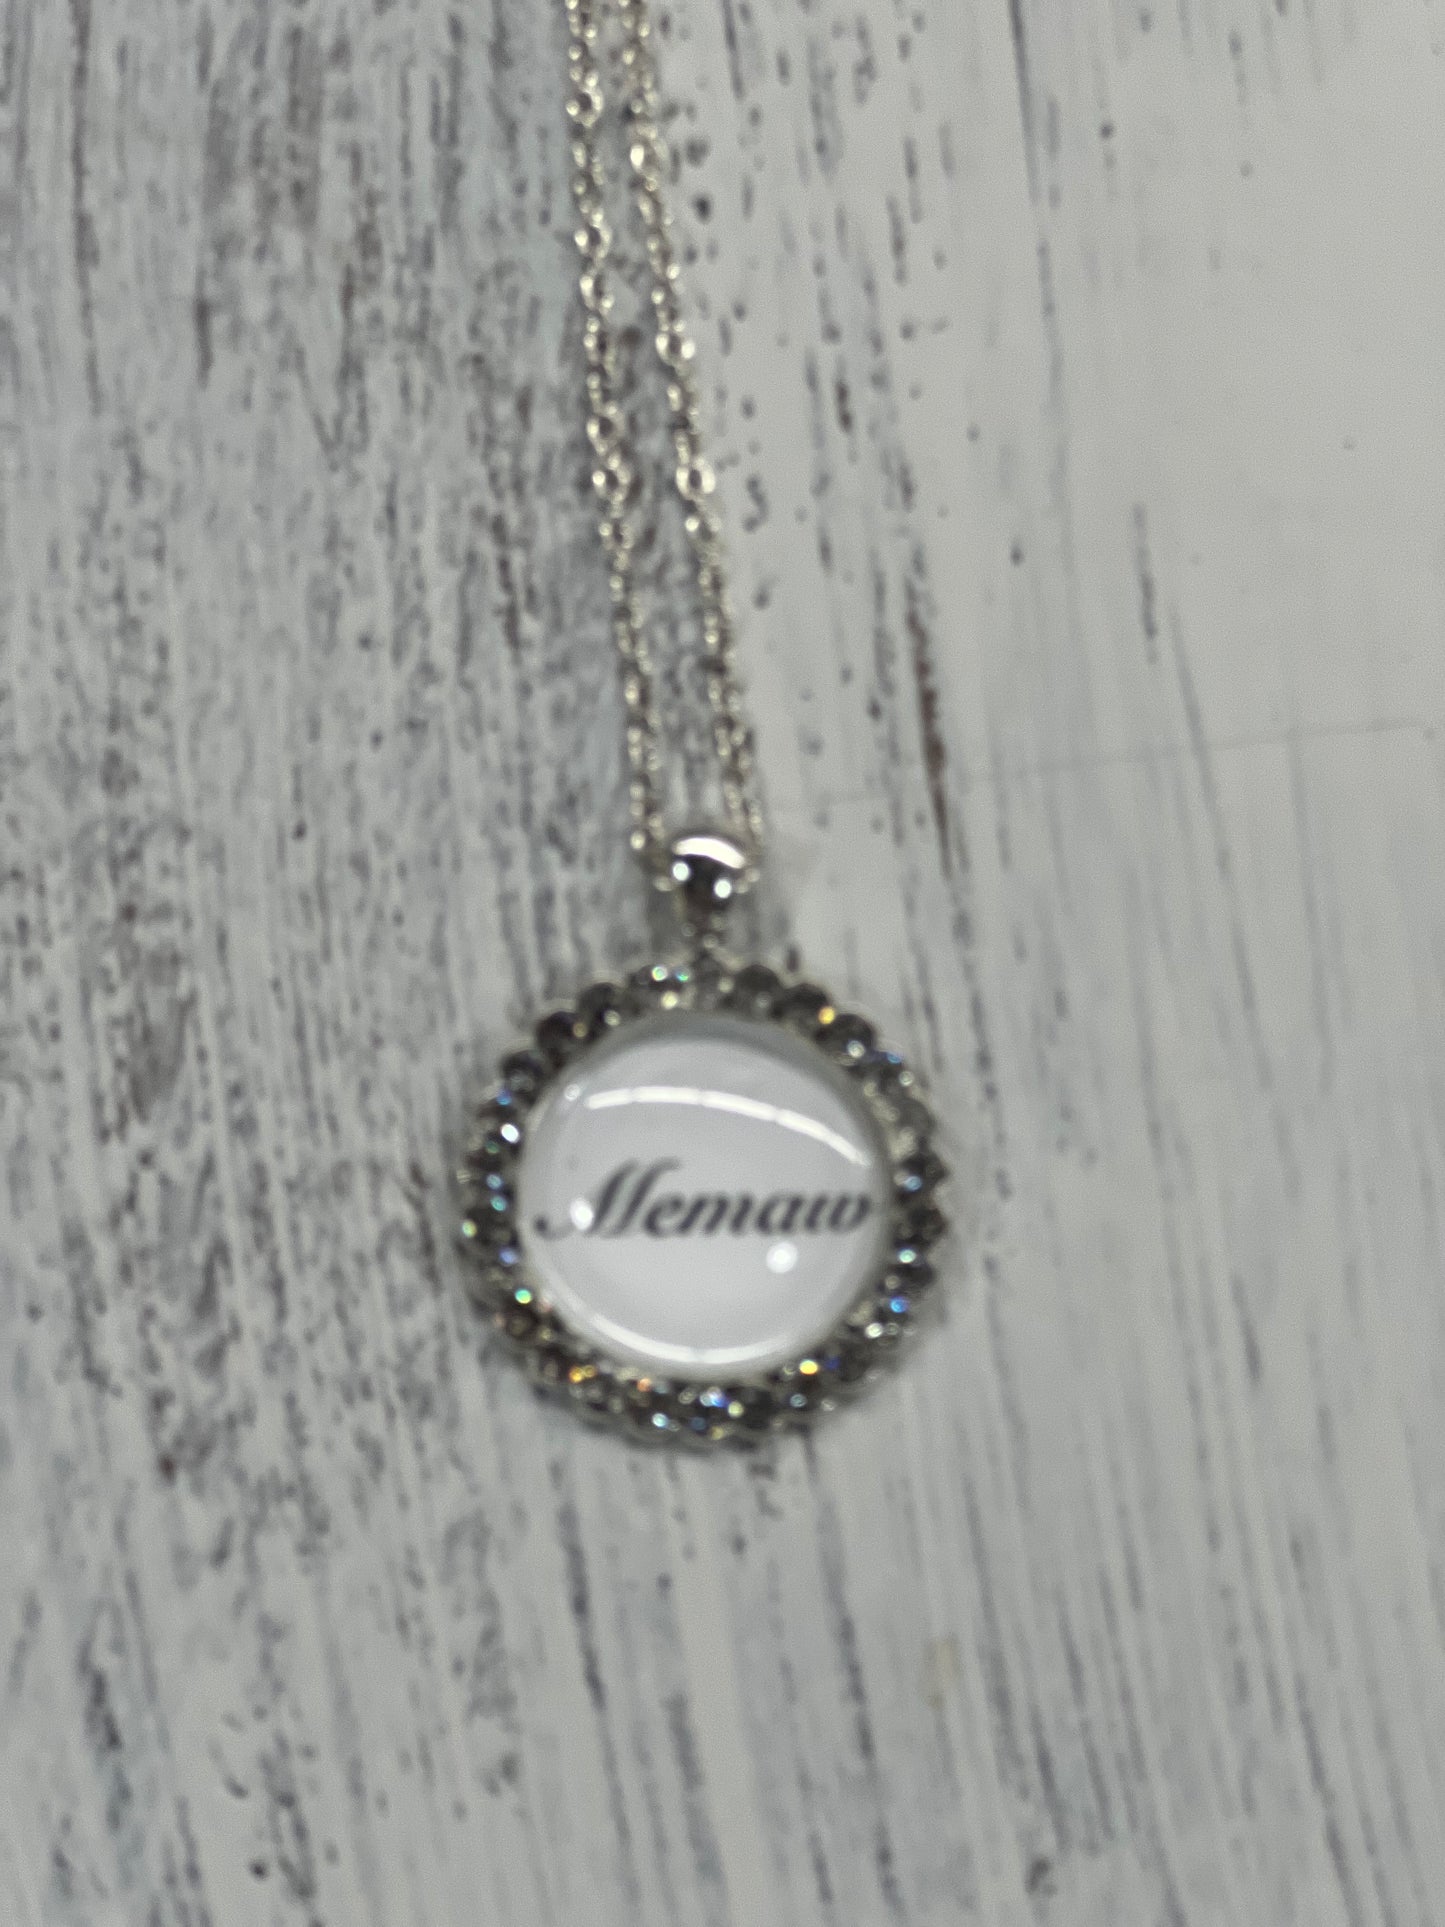 Silver Mother/Grandmother necklaces